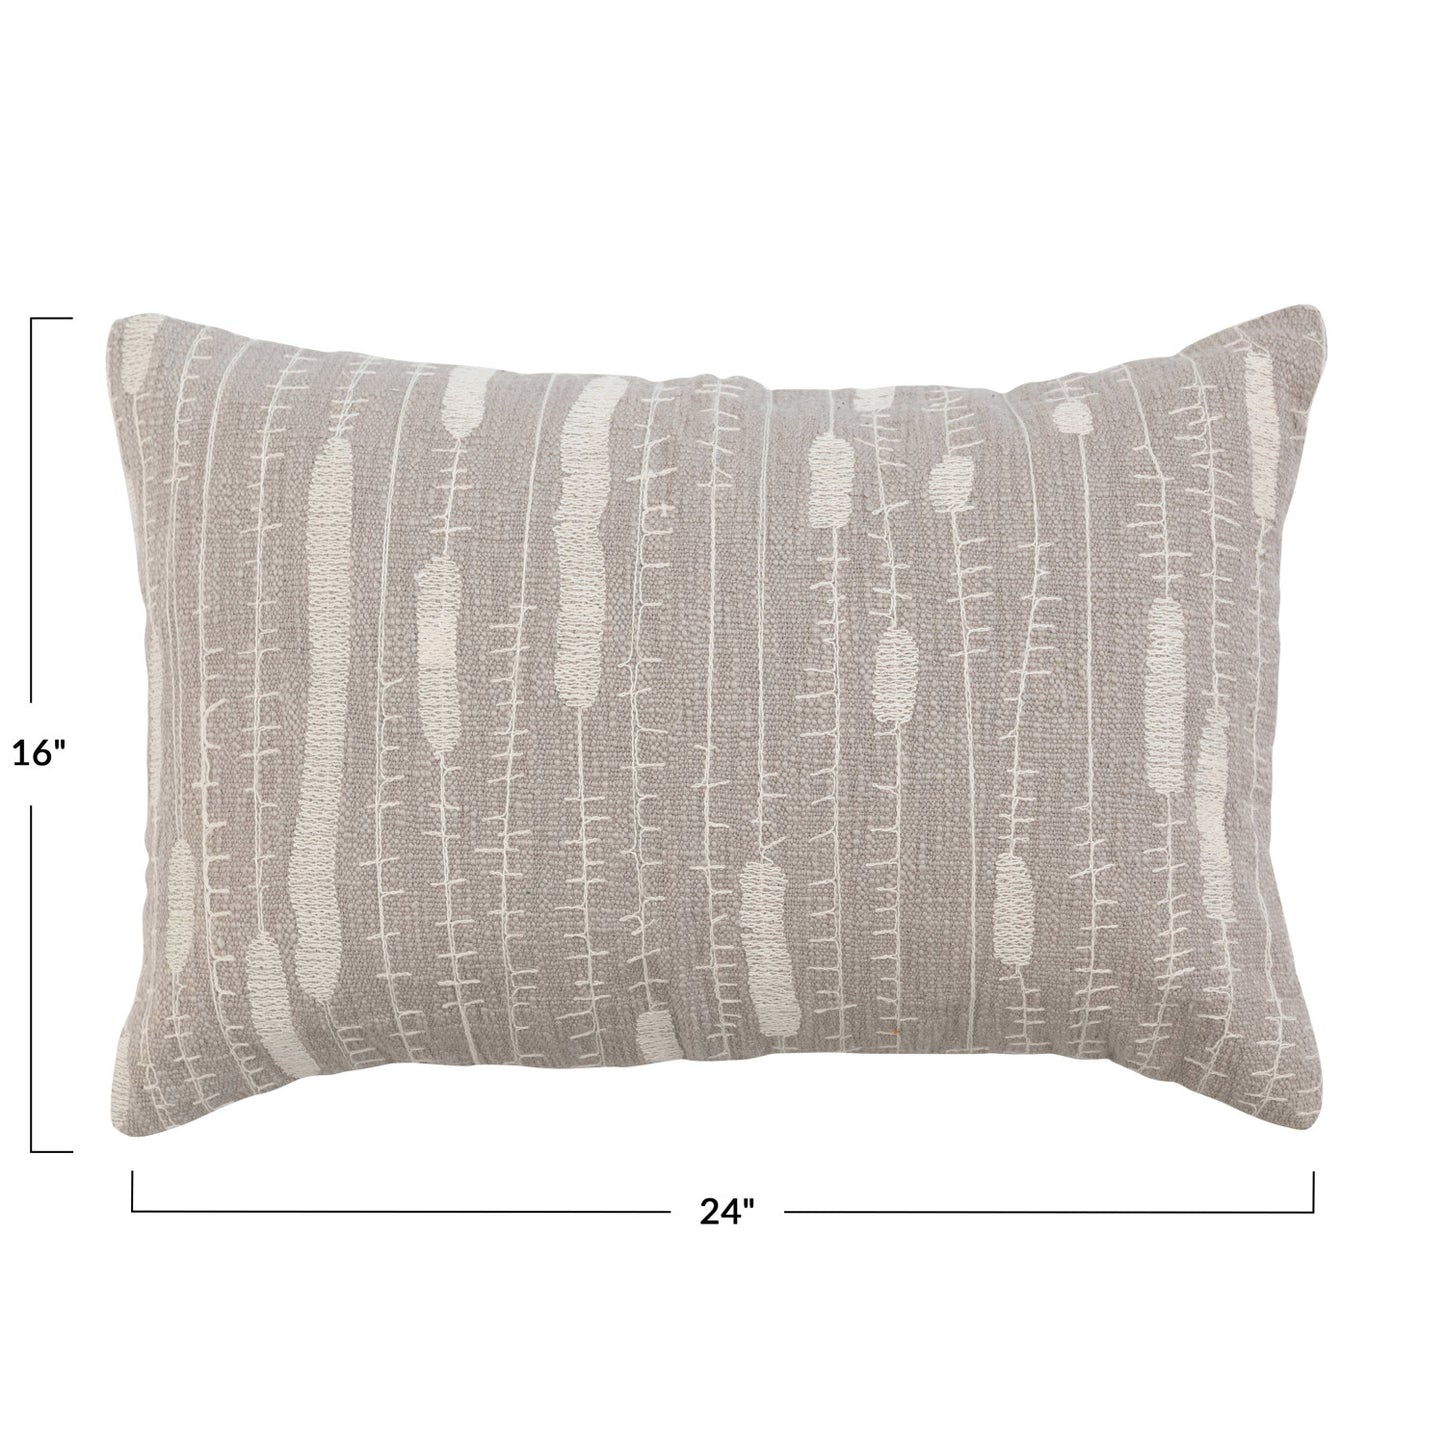 Cotton Lumbar Pillow w/ Embroidery, Down Fill